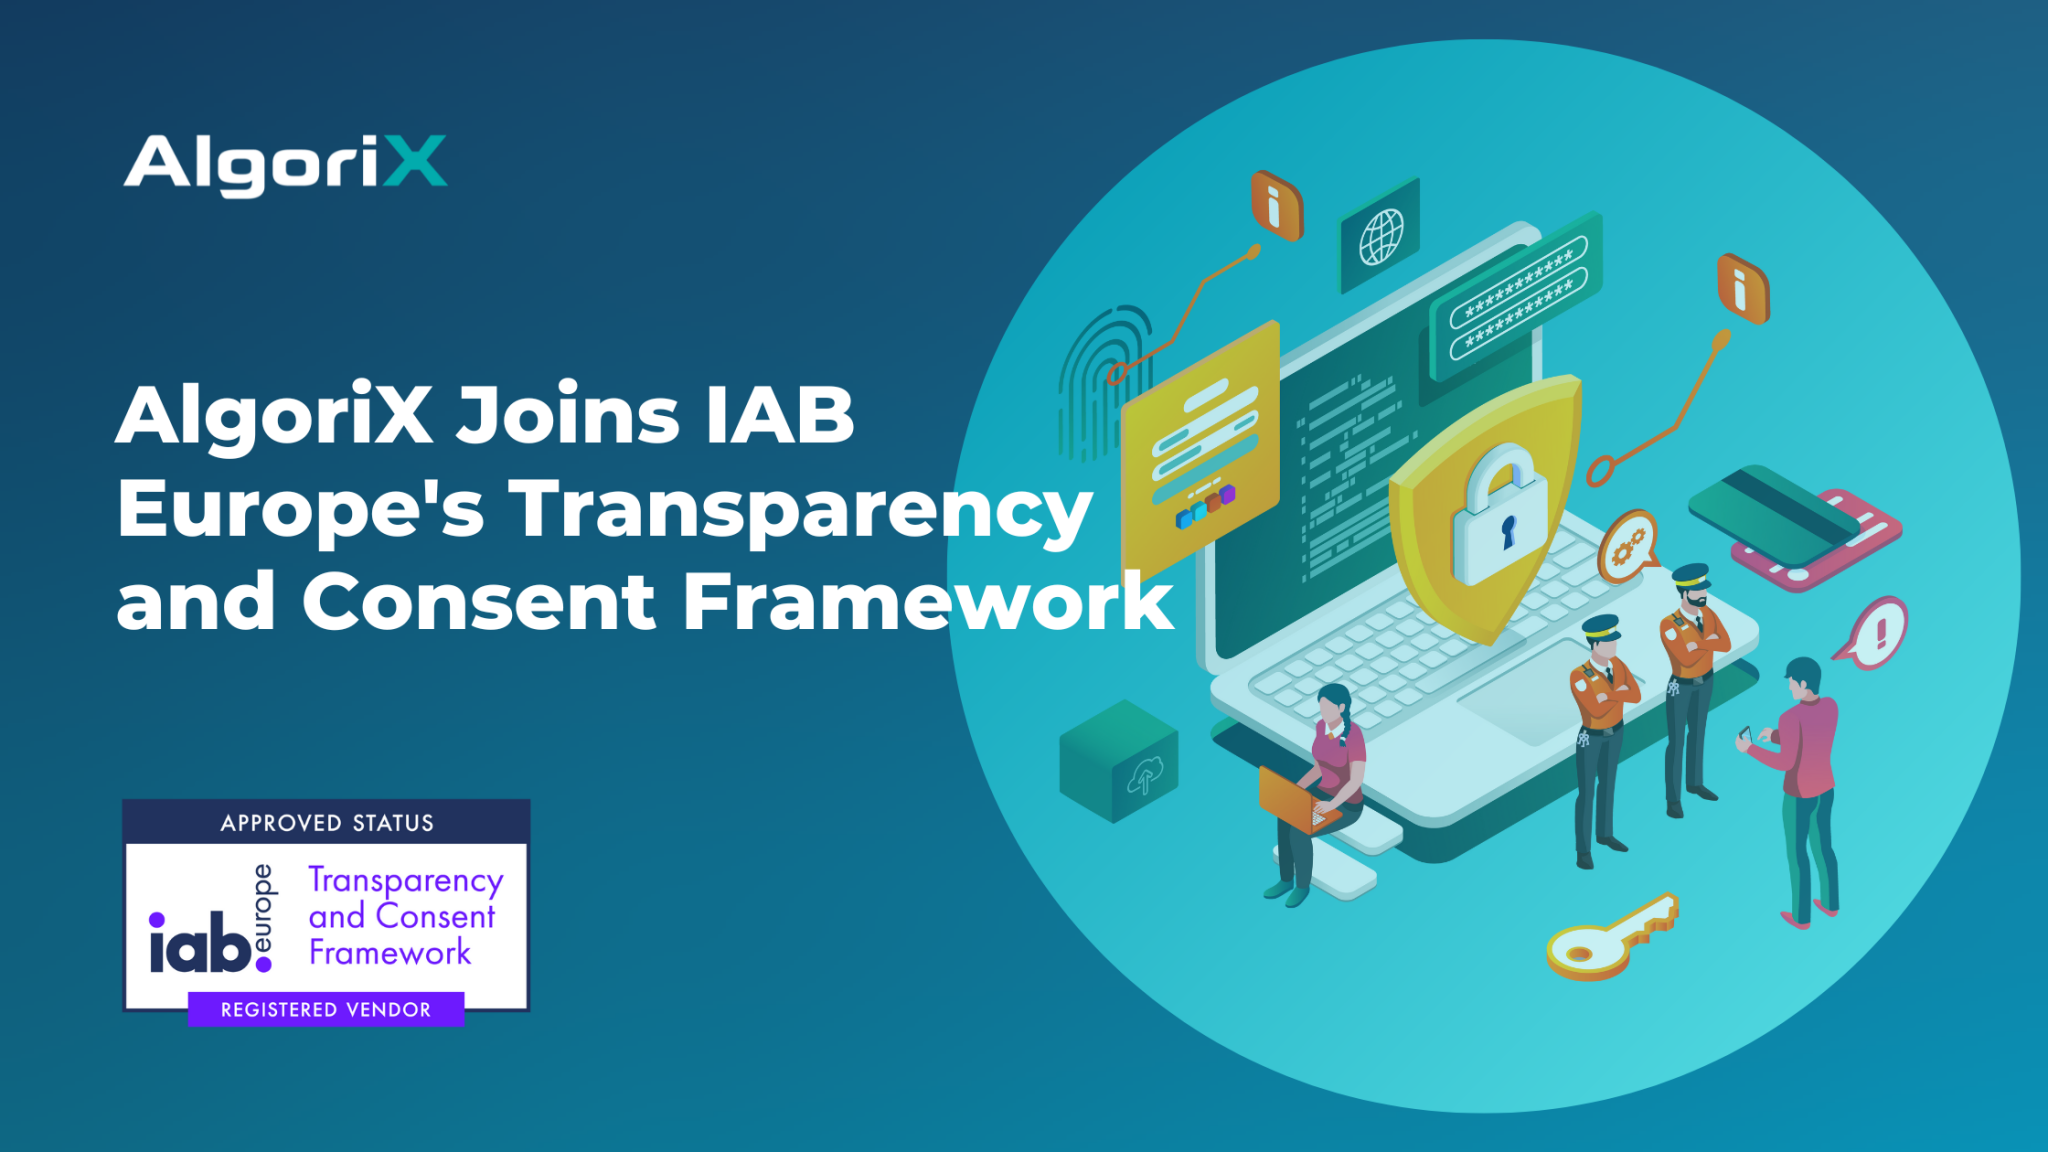 Announcement of AlgoriX joining IAB Europe's Transparency and Consent Framework